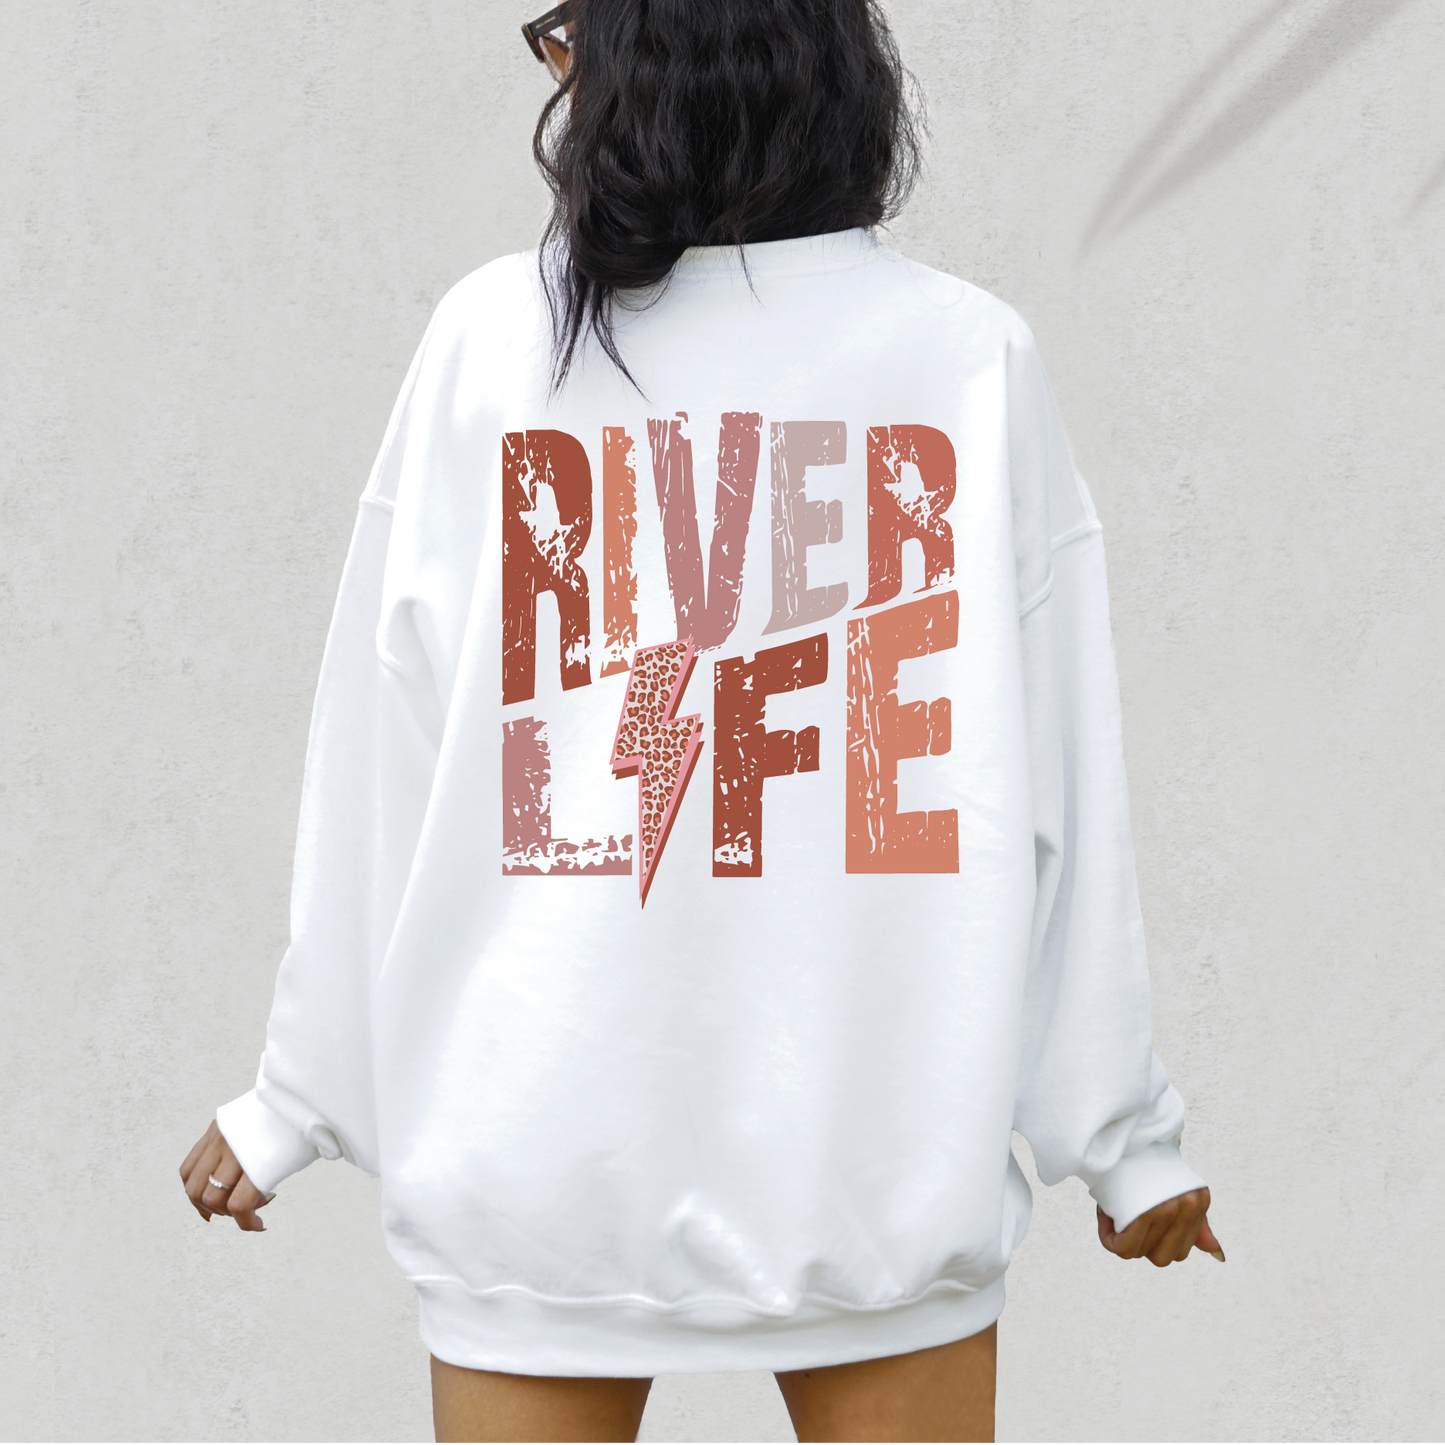 a woman wearing a white sweatshirt with the words river life printed on it